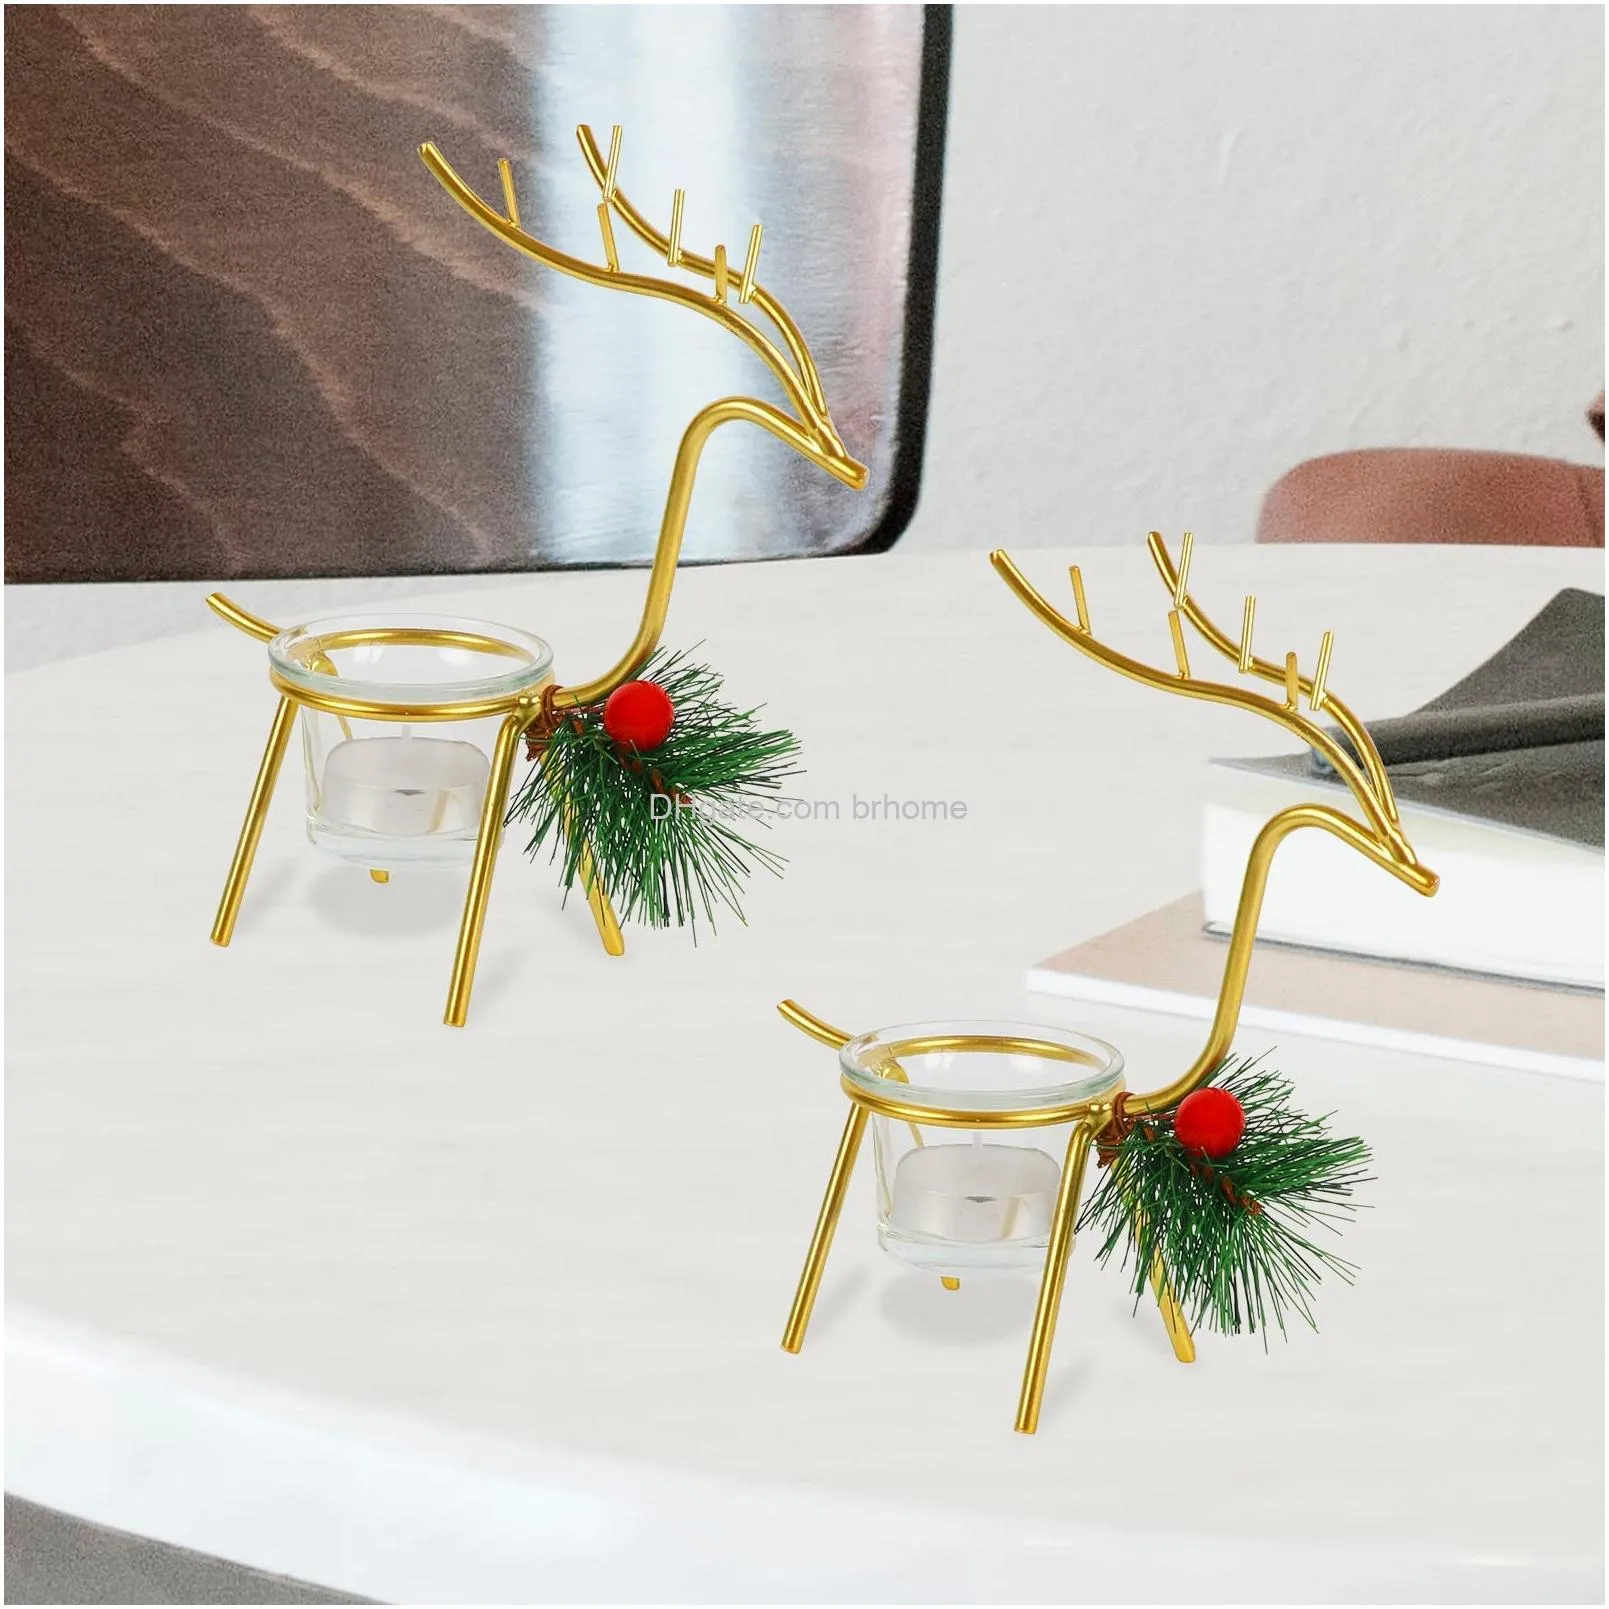 metal reindeer tea light candle holders of gold candle holders for christmas reindeer decoration for table mantel window sill holiday wedding housewarming